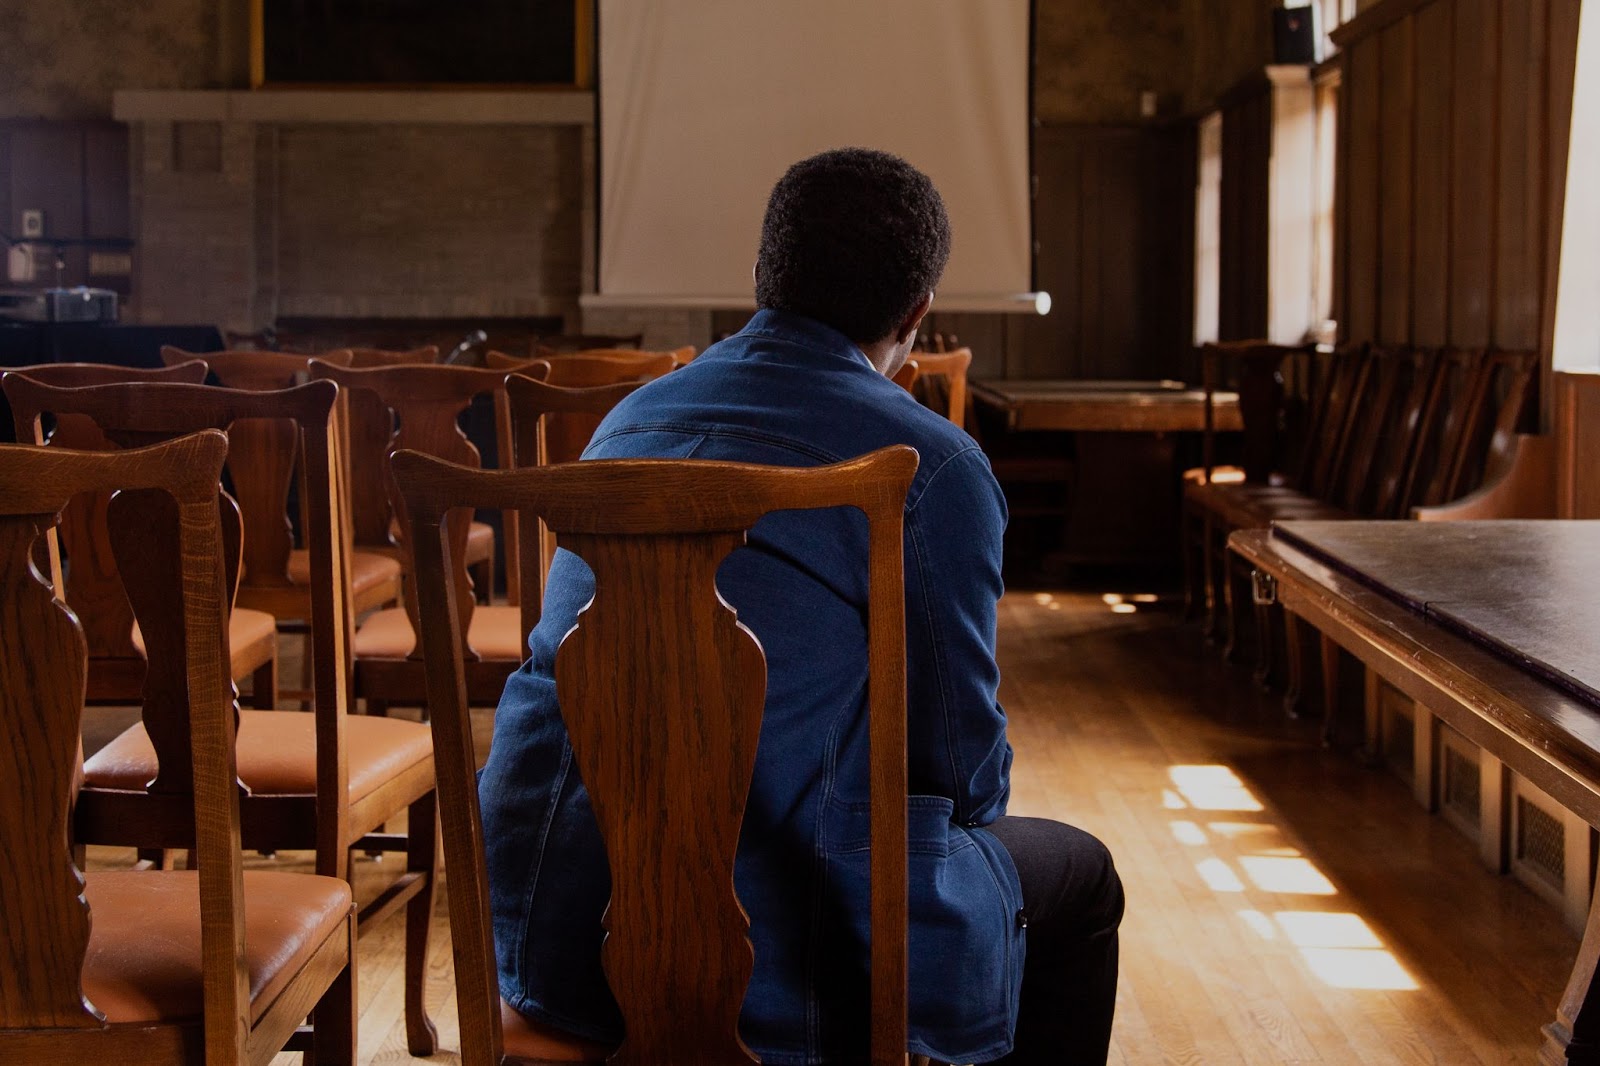 Image: Ross Stanton Jordan sits, back turned to the camera, in a room of the Jane Addams Hull House Museum, again surrounded by variations on the color brown through a wooden table and chairs next to him and wood paneling and wall paper on the walls around him. His head is slightly framed by a projector screen in the distance. He's wearing a denim jacket, dark brown pants. Photo by Joshua Clay Johnson.